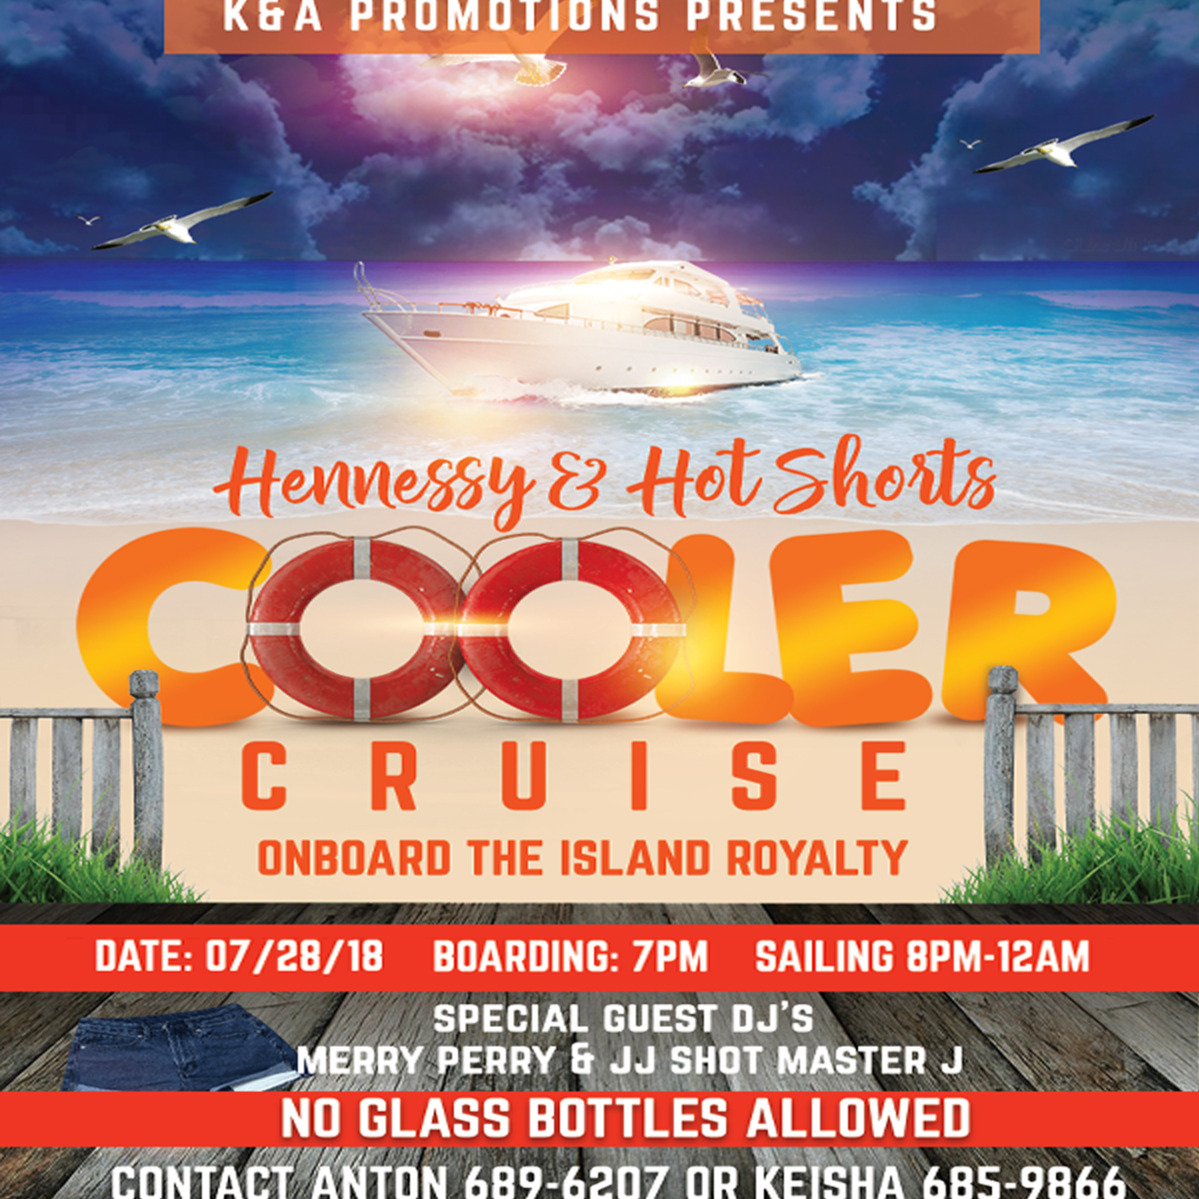 HENNESSY & HOT SHOTS COOLER CRUISE